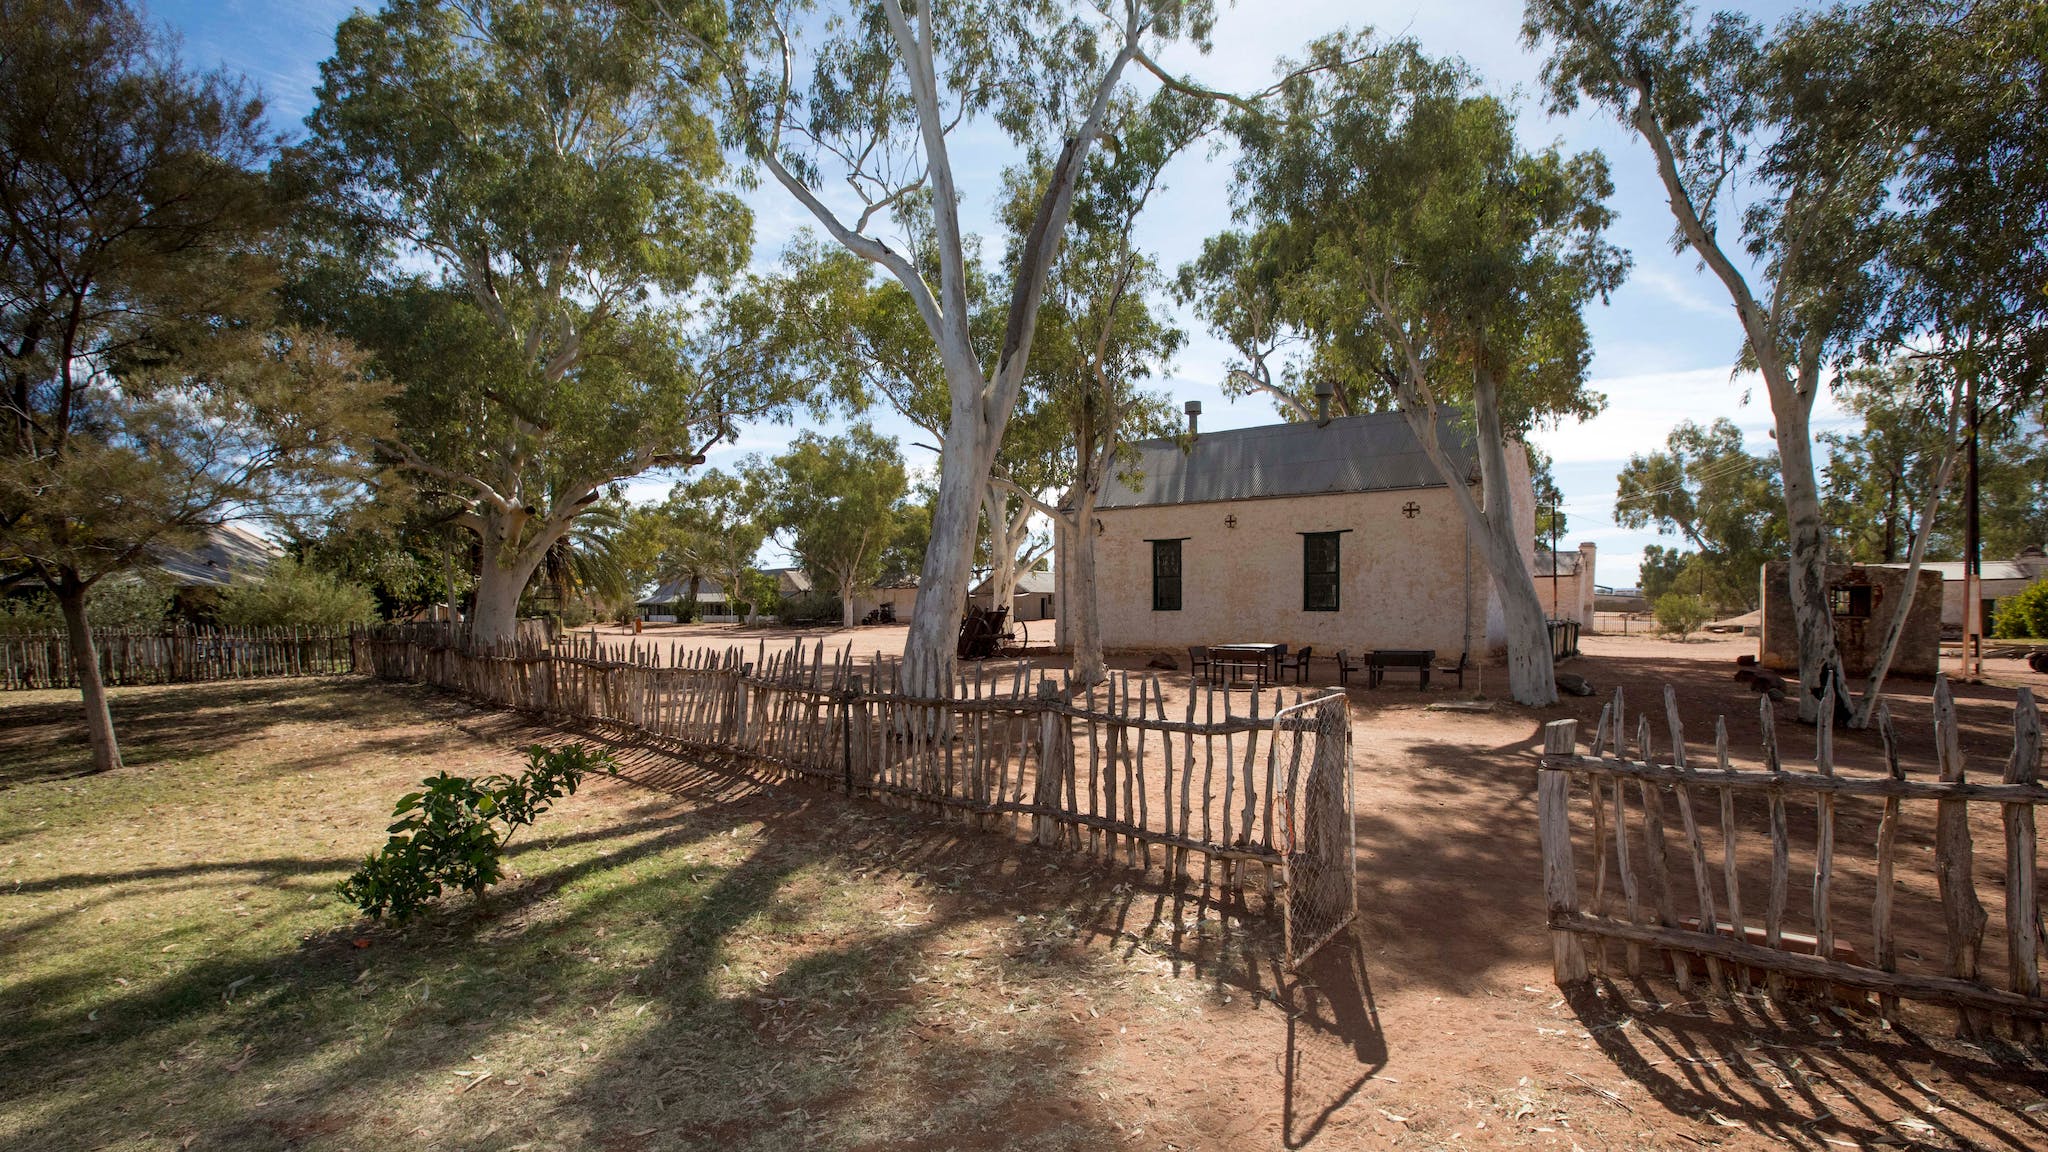 gum trees shading historical buildings